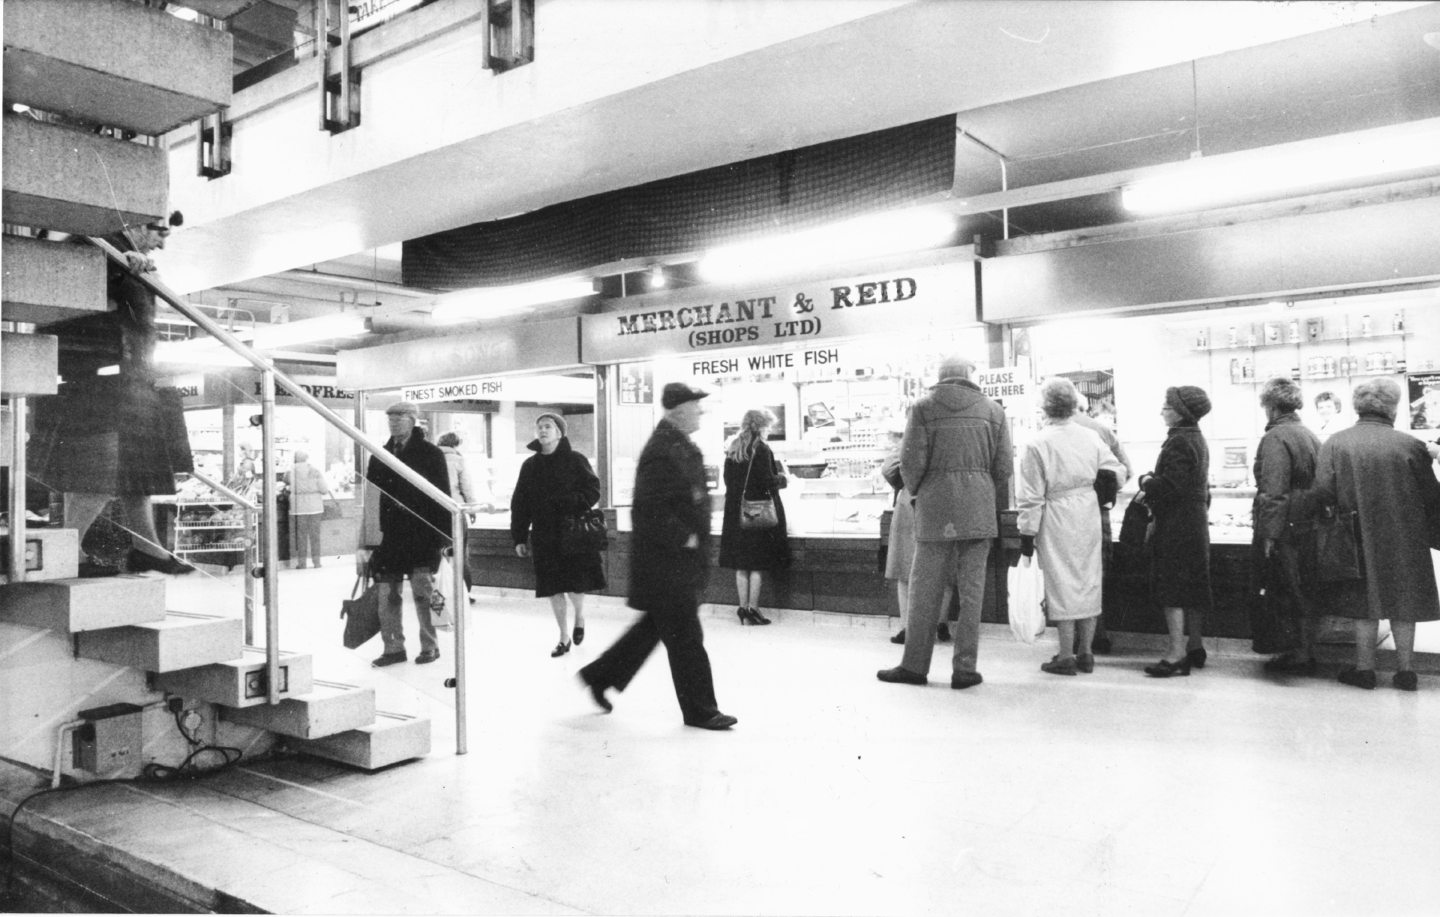 Merchant and Reid was a fish business that started life in 1985 at Aberdeen Market.